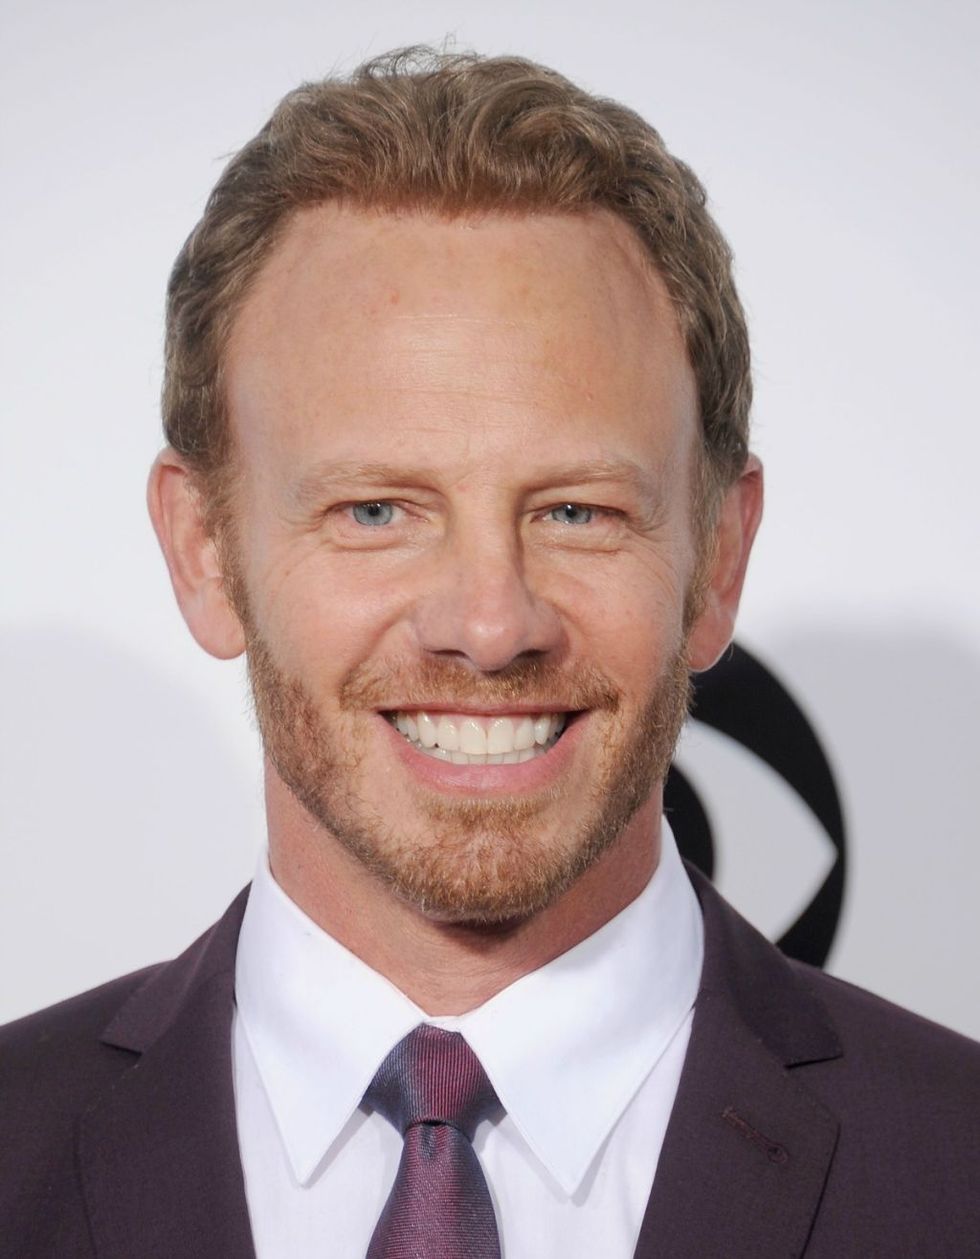 <p>While he had appeared in a few bit&nbsp;TV roles&nbsp;before <em data-redactor-tag="em" data-verified="redactor">Beverly Hills 90210</em>, the hit show launched Ian's career. On the show, he played Steve Sanders<span class="redactor-invisible-space" data-verified="redactor" data-redactor-tag="span" data-redactor-class="redactor-invisible-space">, the high school's&nbsp;resident jock. He continued to make guest appearances on TV shows post-<em data-redactor-tag="em" data-verified="redactor">Beverly Hills, 90210</em><span class="redactor-invisible-space" data-verified="redactor" data-redactor-tag="span" data-redactor-class="redactor-invisible-space"><em data-redactor-tag="em" data-verified="redactor"></em></span><span class="redactor-invisible-space" data-verified="redactor" data-redactor-tag="span" data-redactor-class="redactor-invisible-space">,</span> but his big comeback&nbsp;came with Syfy<span class="redactor-invisible-space" data-verified="redactor" data-redactor-tag="span" data-redactor-class="redactor-invisible-space">'s</span> <em data-redactor-tag="em" data-verified="redactor">Sharknado </em>in 2013. The campy movie's success spawned&nbsp;three&nbsp;<em data-redactor-tag="em" data-verified="redactor">Sharknado</em> sequels.  Prior to the whirlwind of <em data-redactor-tag="em" data-verified="redactor">Sharknado</em>, Ian made it to the semi-finals of season 4 of <em data-redactor-tag="em" data-verified="redactor">Dancing with the Stars</em> and auditioned to be the host of&nbsp;<em data-redactor-tag="em" data-verified="redactor">The Price Is Right </em>in 2007 (he lost out to Drew Carey). </span></p>